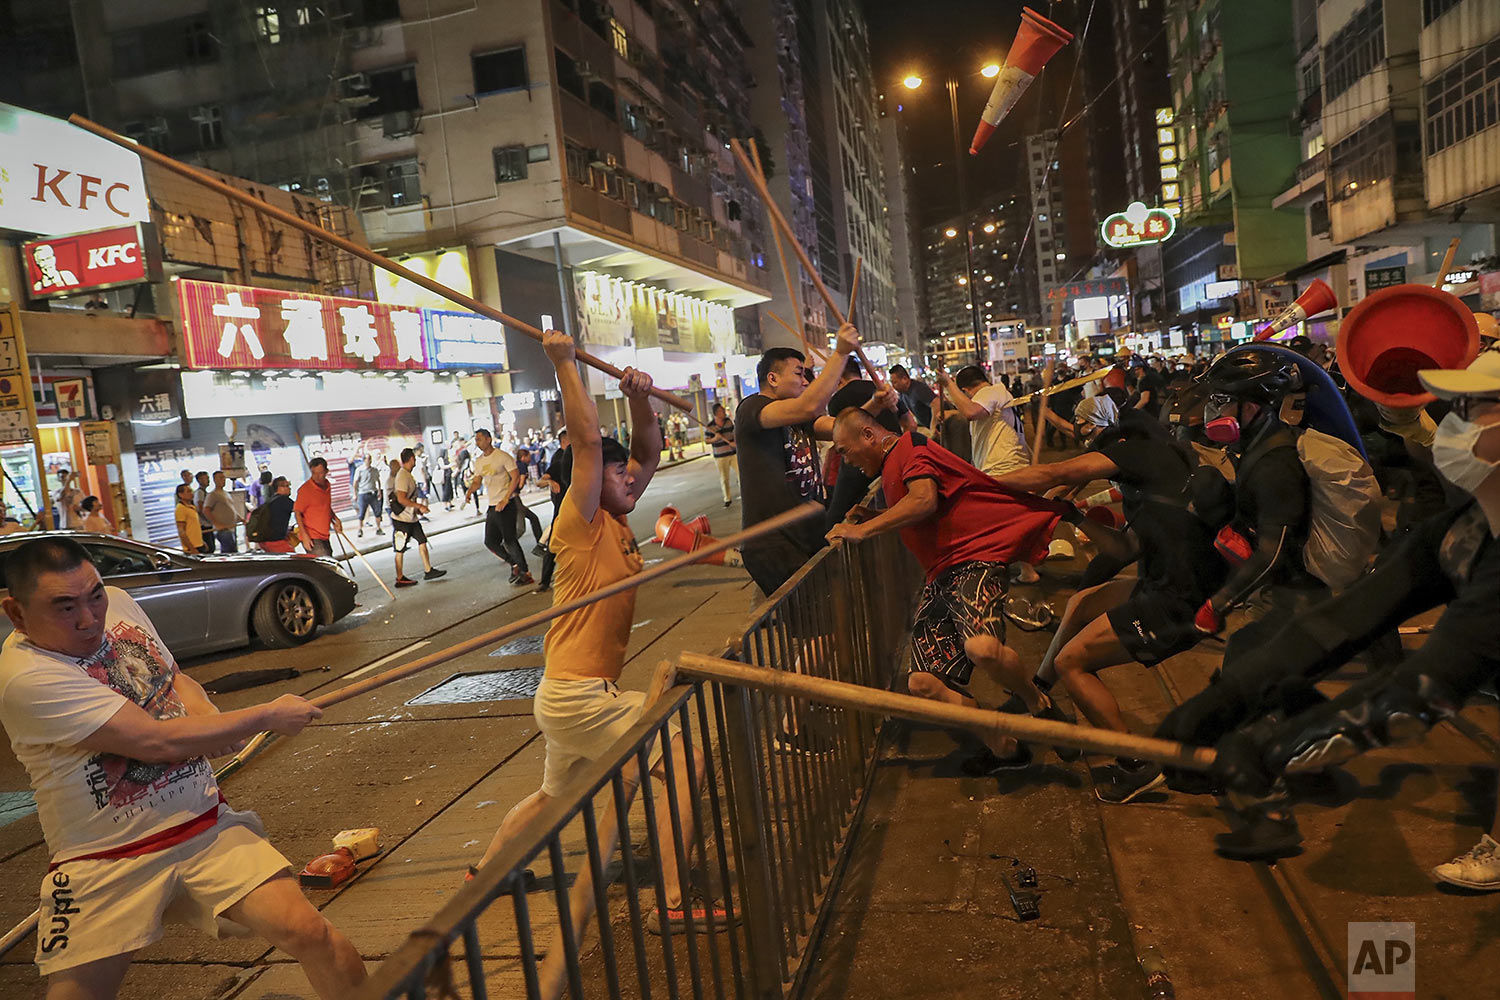  Protesters wearing black shirts, right, fight with a group of men wielding wooden poles on a street during the anti-extradition bill protest at a neighborhood in Hong Kong, Monday, Aug. 5, 2019. (AP Photo) 